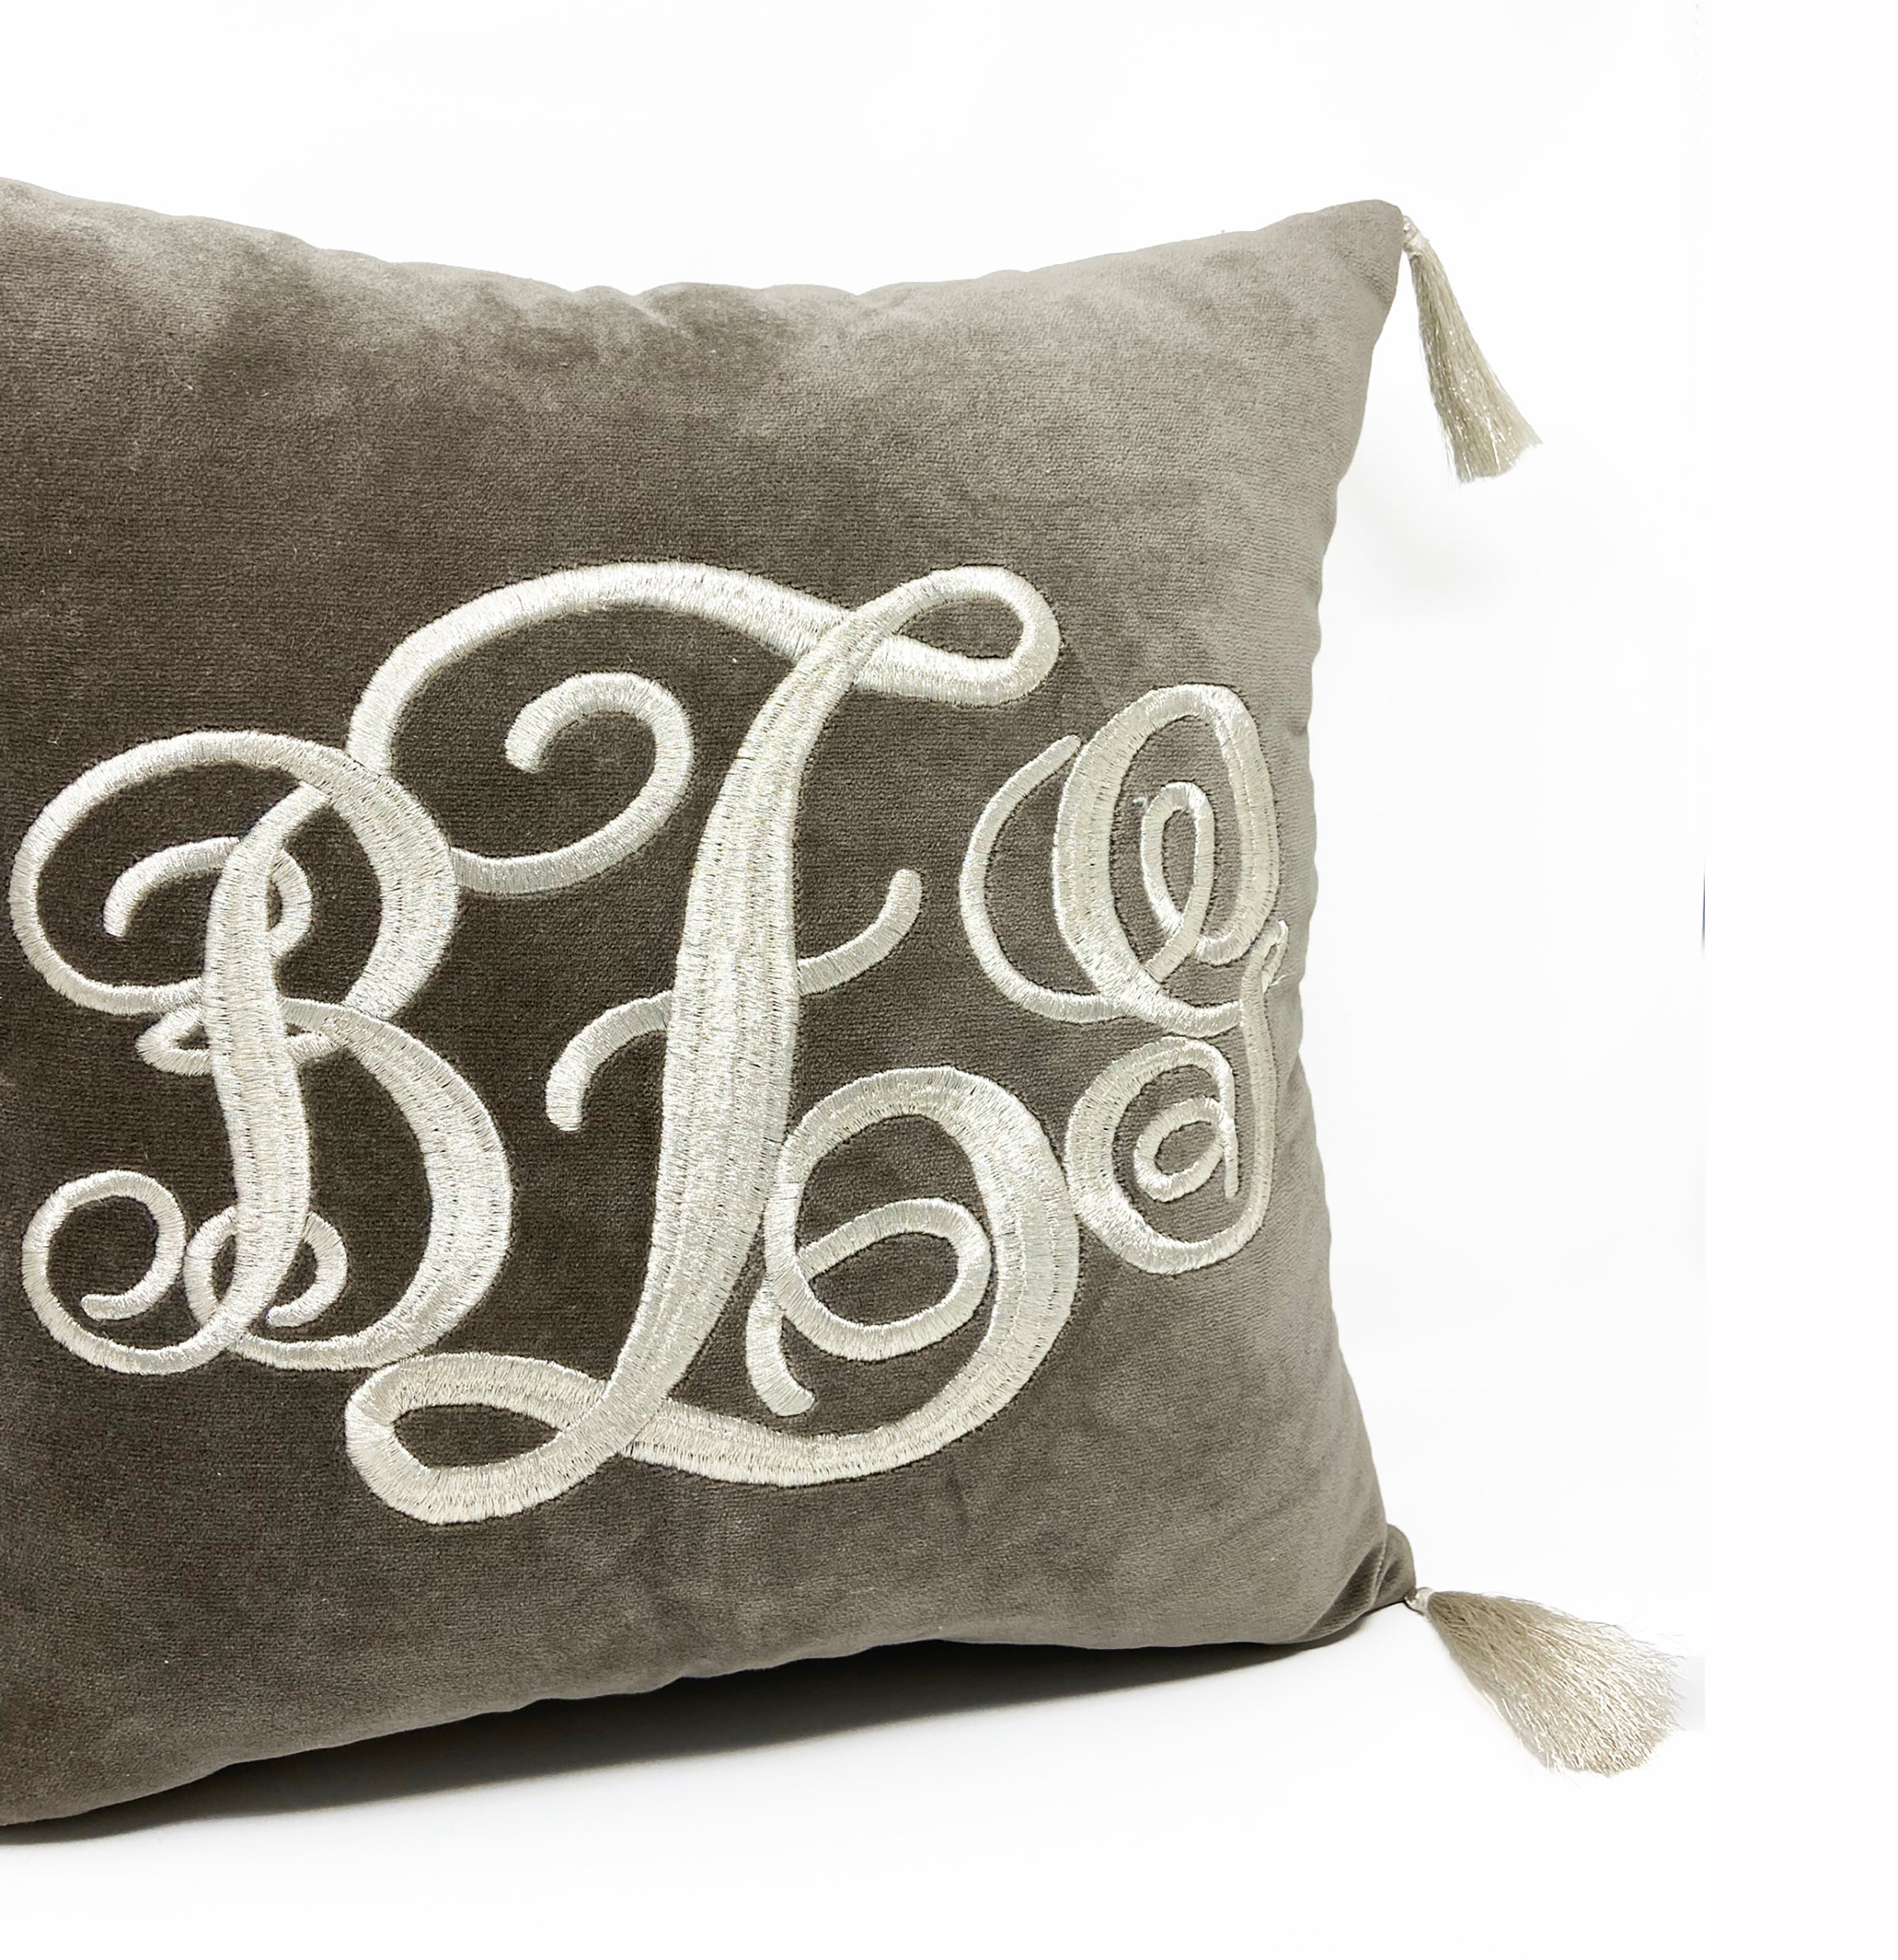 Amore Beaute gorgeous gray velvet pillow cover with silver embroidery is a perfect gift for the ones who are obsessed with sparkle.